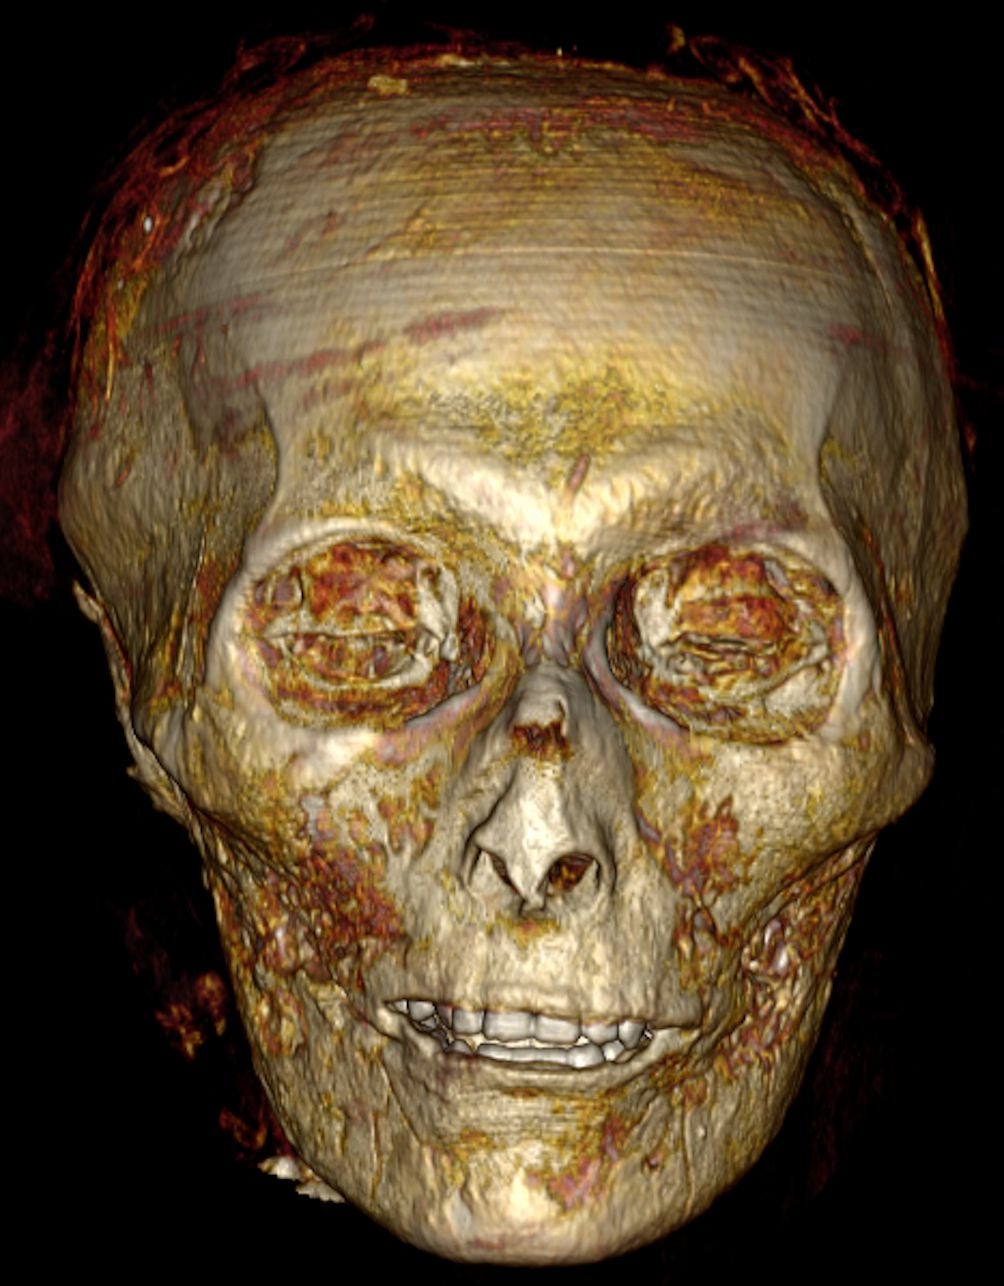 Digital Unwrapping of Pharaoh’s Mummy Reveals Curly Hair, Amulets, and Jewellery